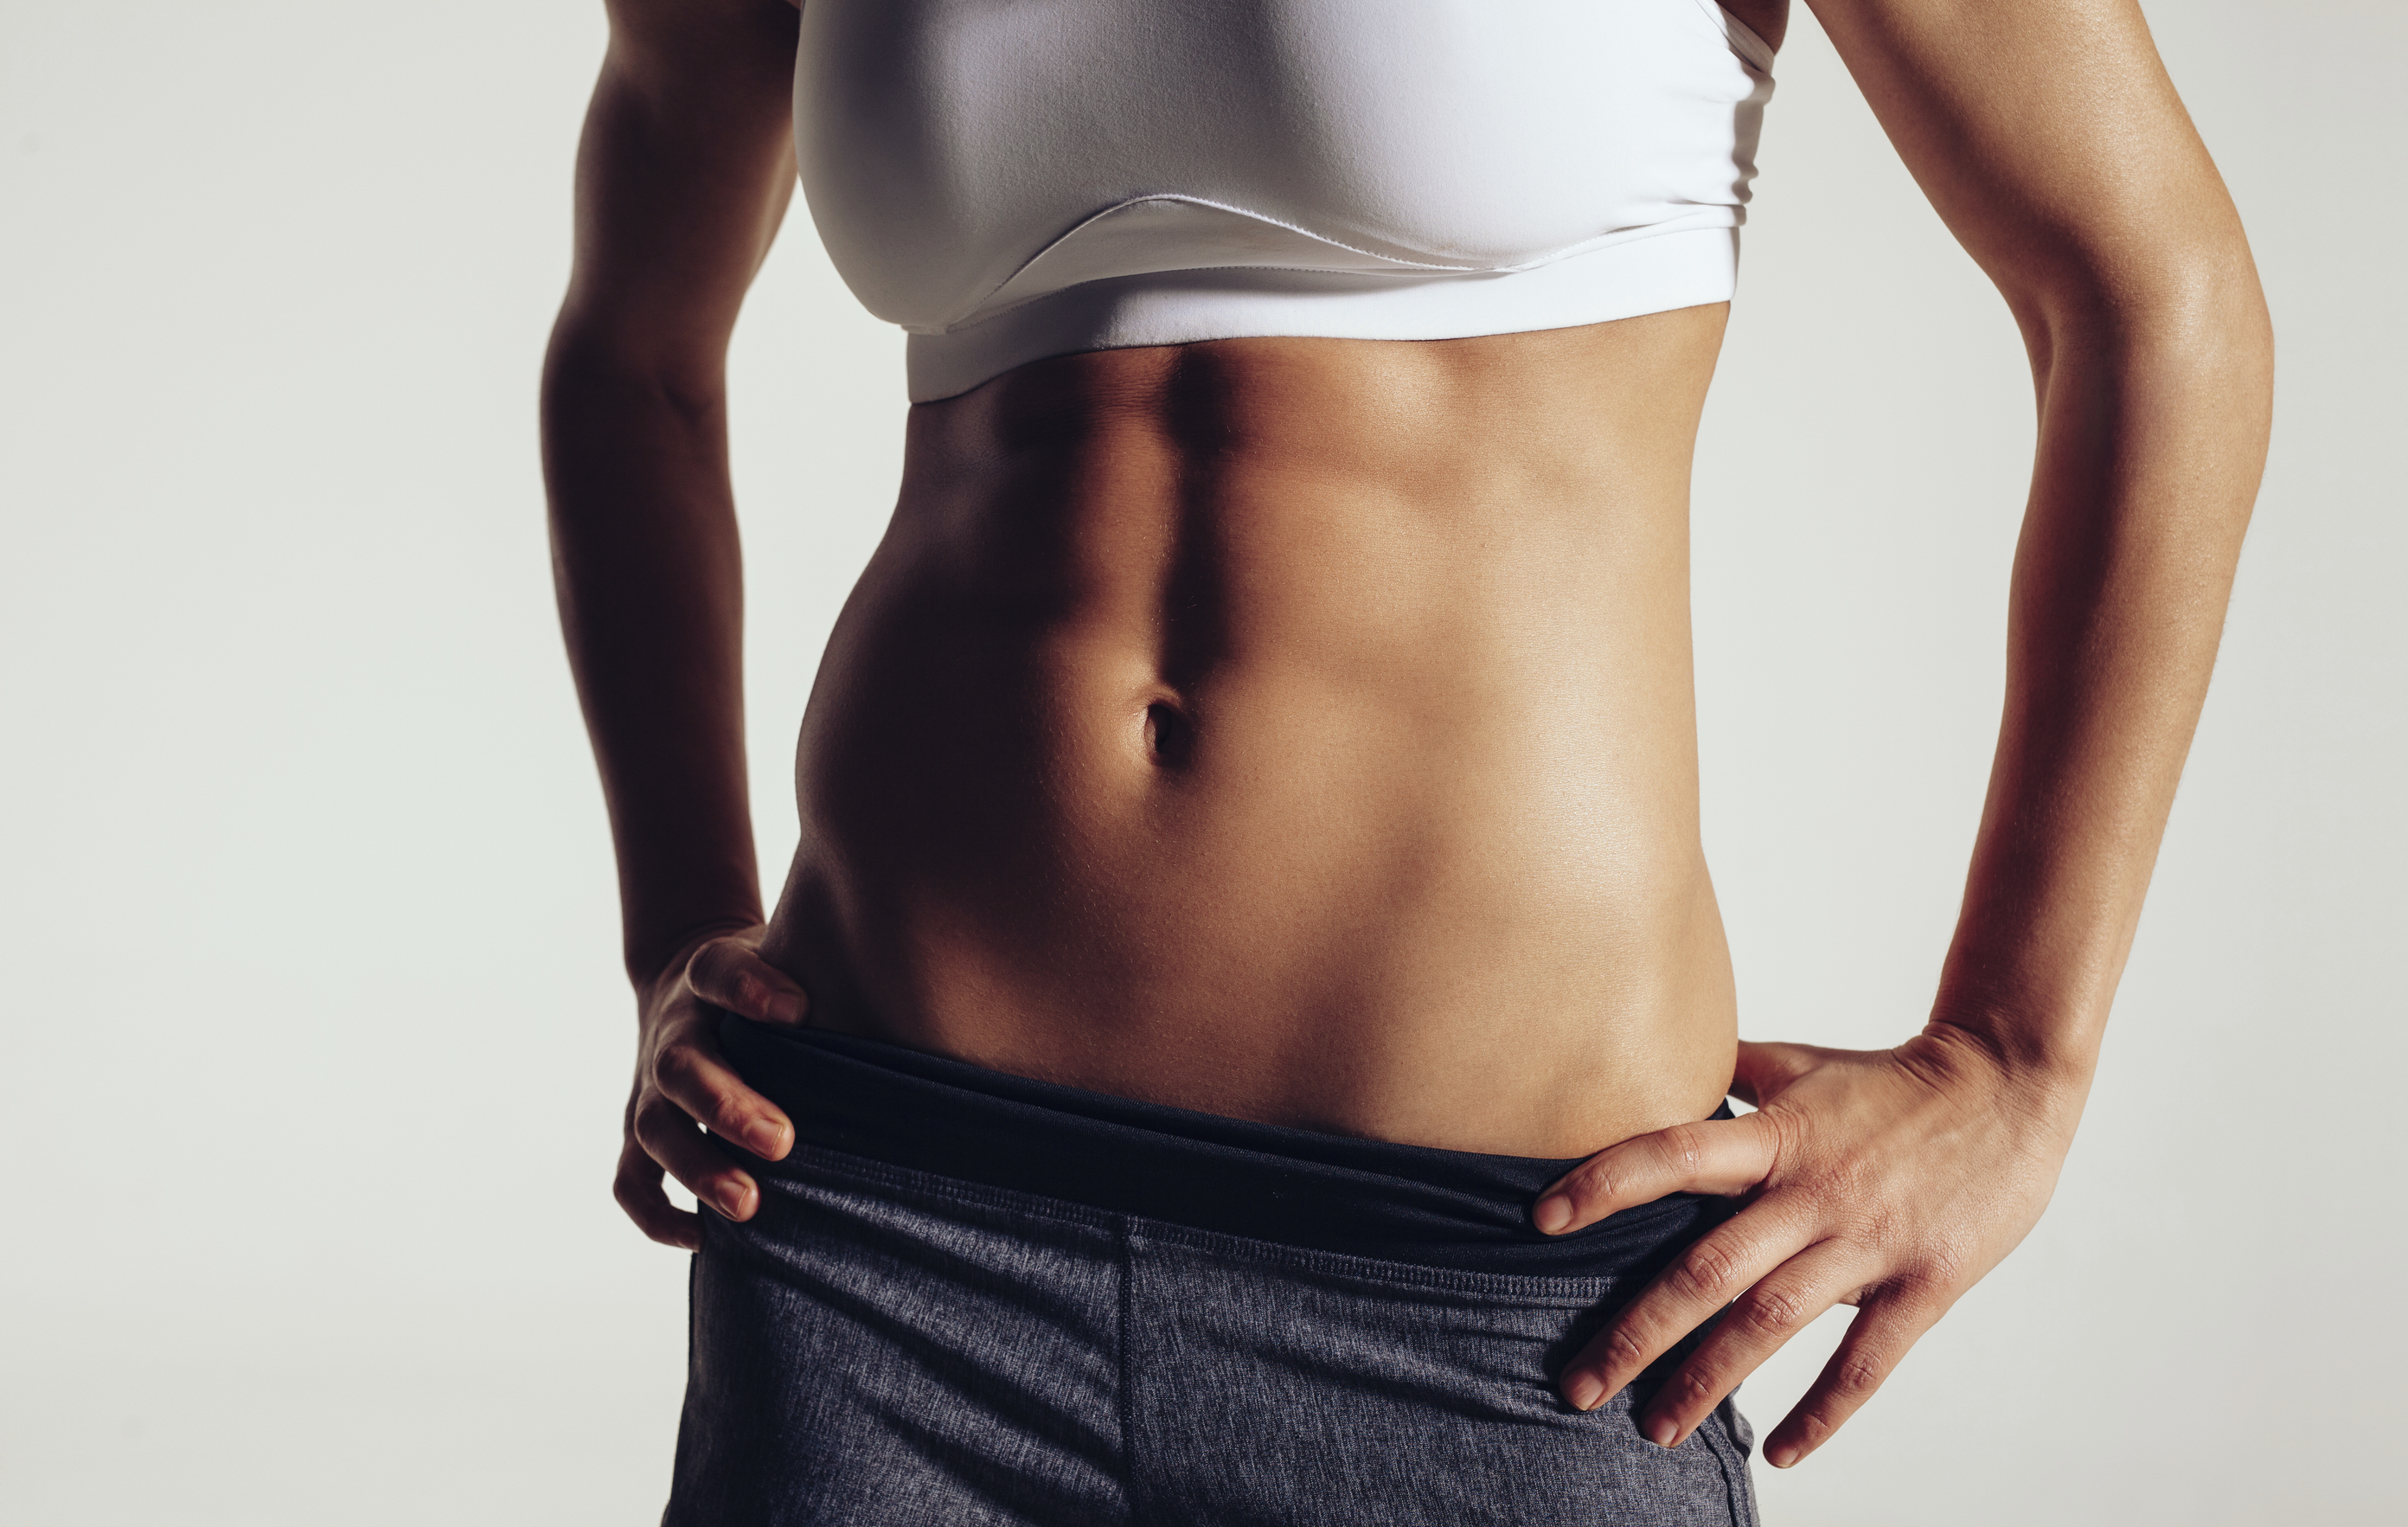 As If 'Thigh Gap' Wasn't Enough, Now You Need An 'Ab Crack' For